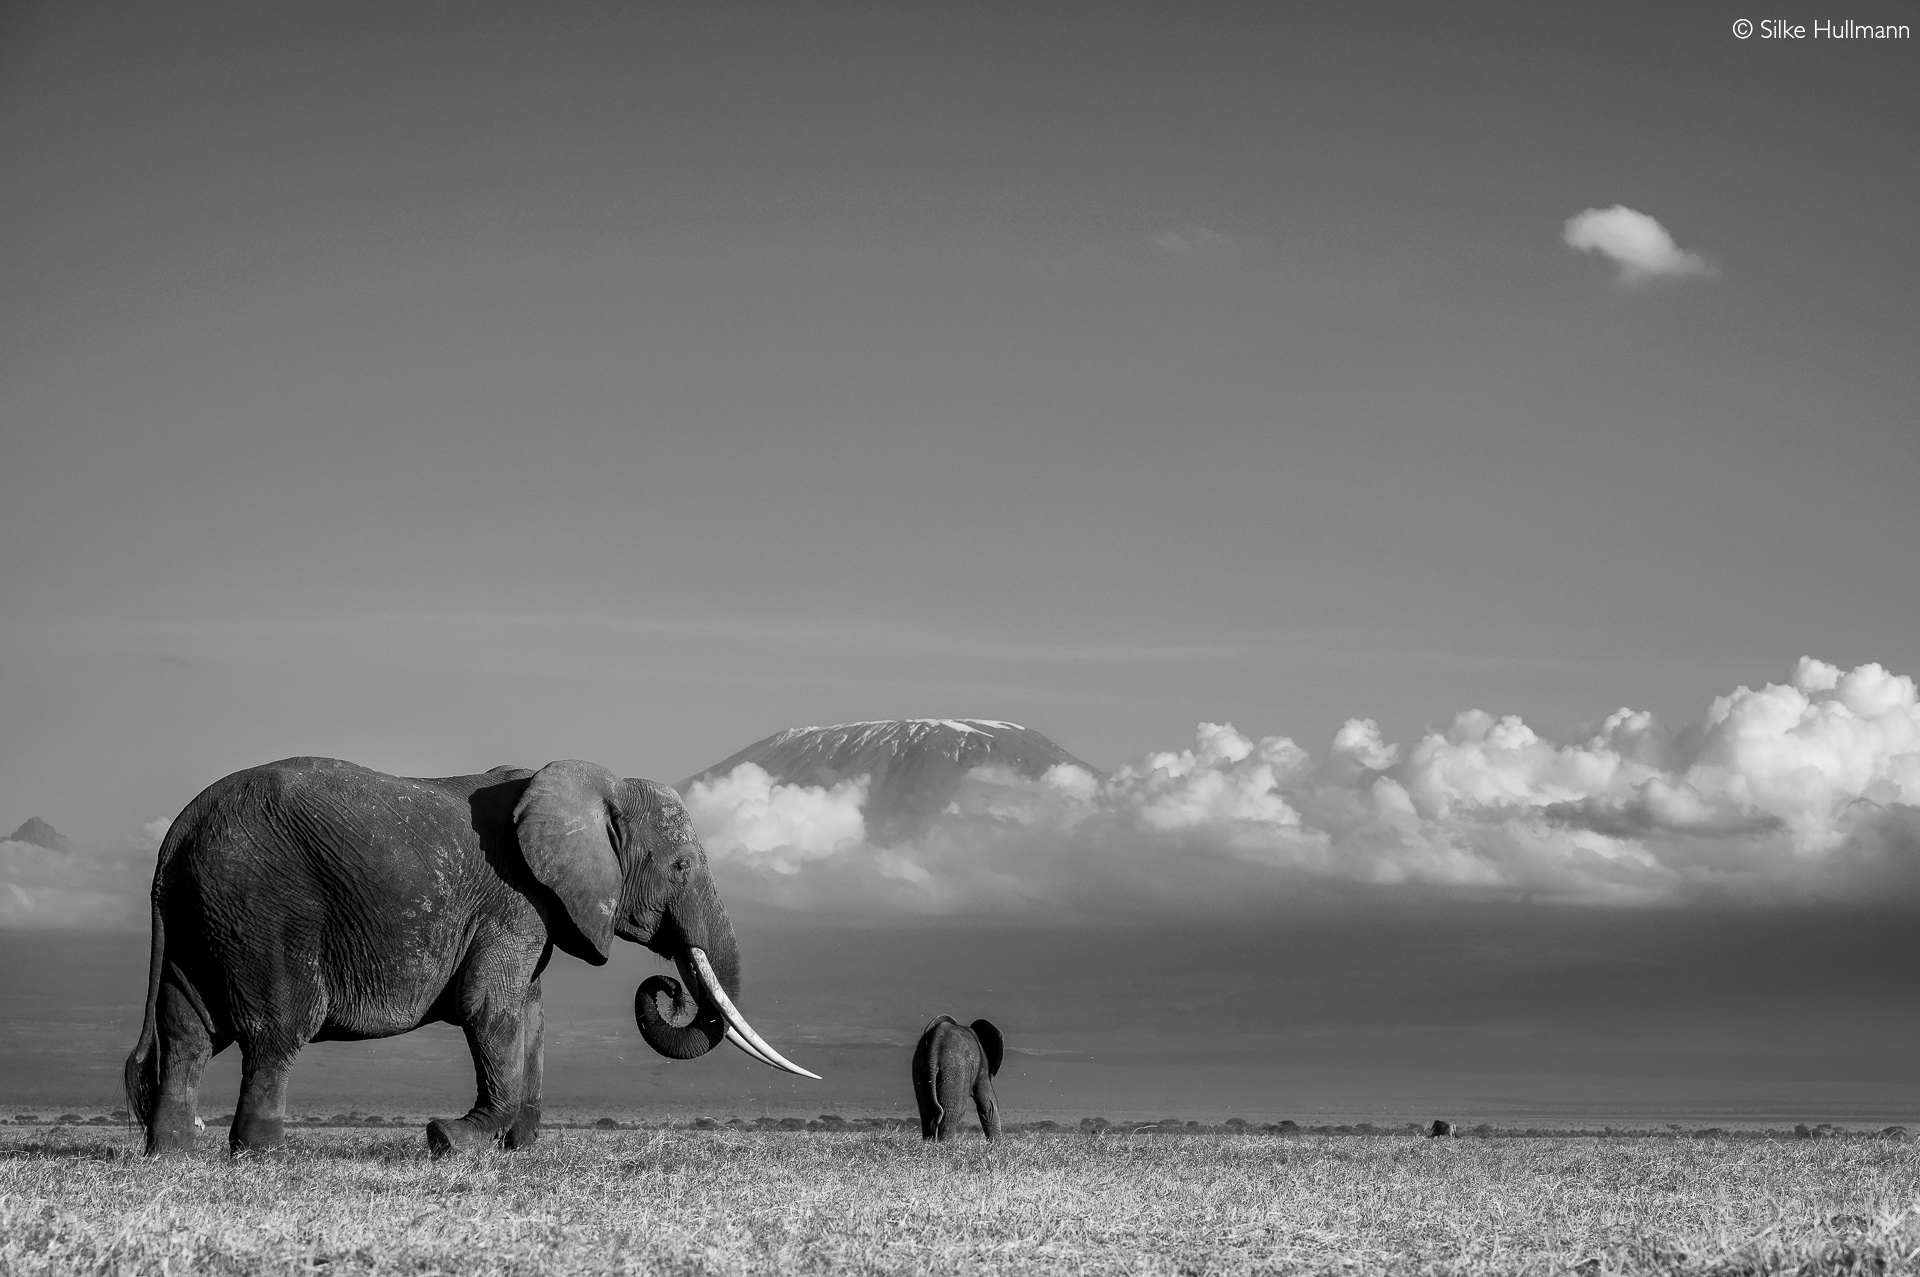 Amboseli super tuskers down to 10 as trophy hunters operate in stealth mode - Africa Geographic